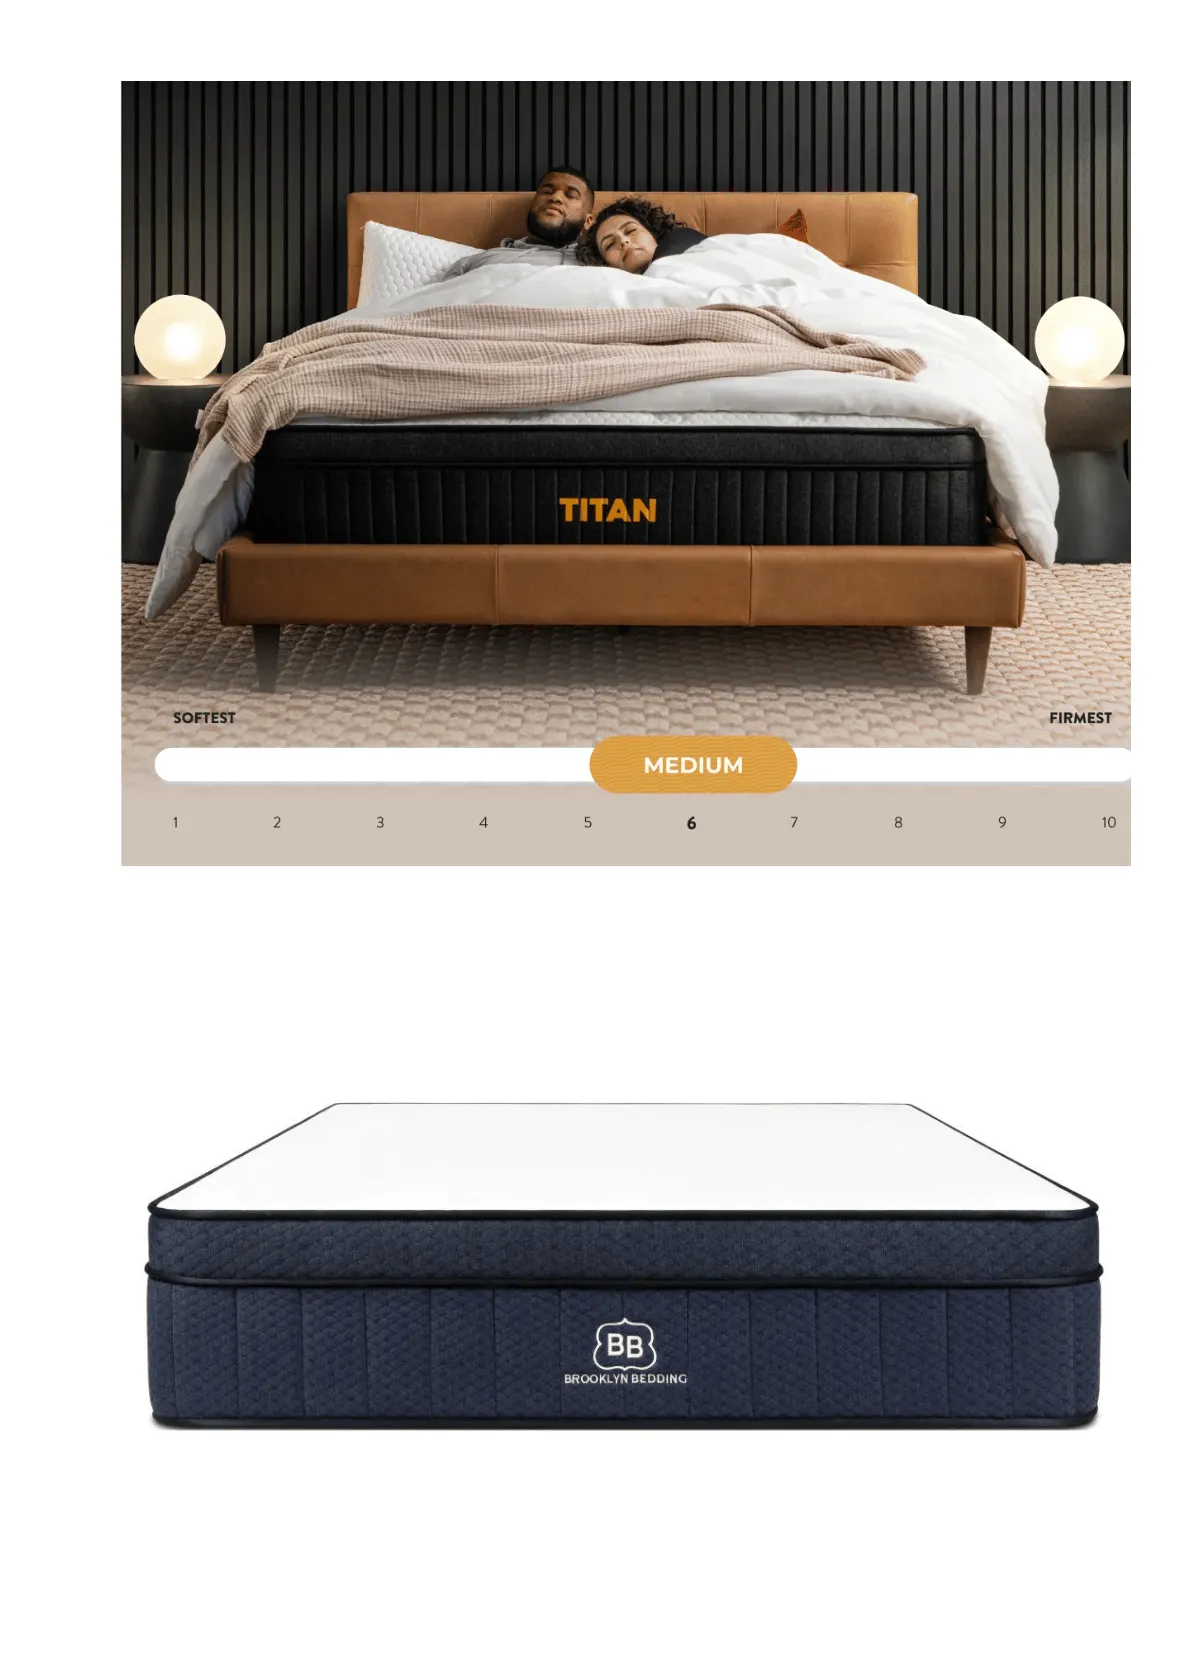 "Titan Mattress Review: Best Features for Plus-Size Sleepers"